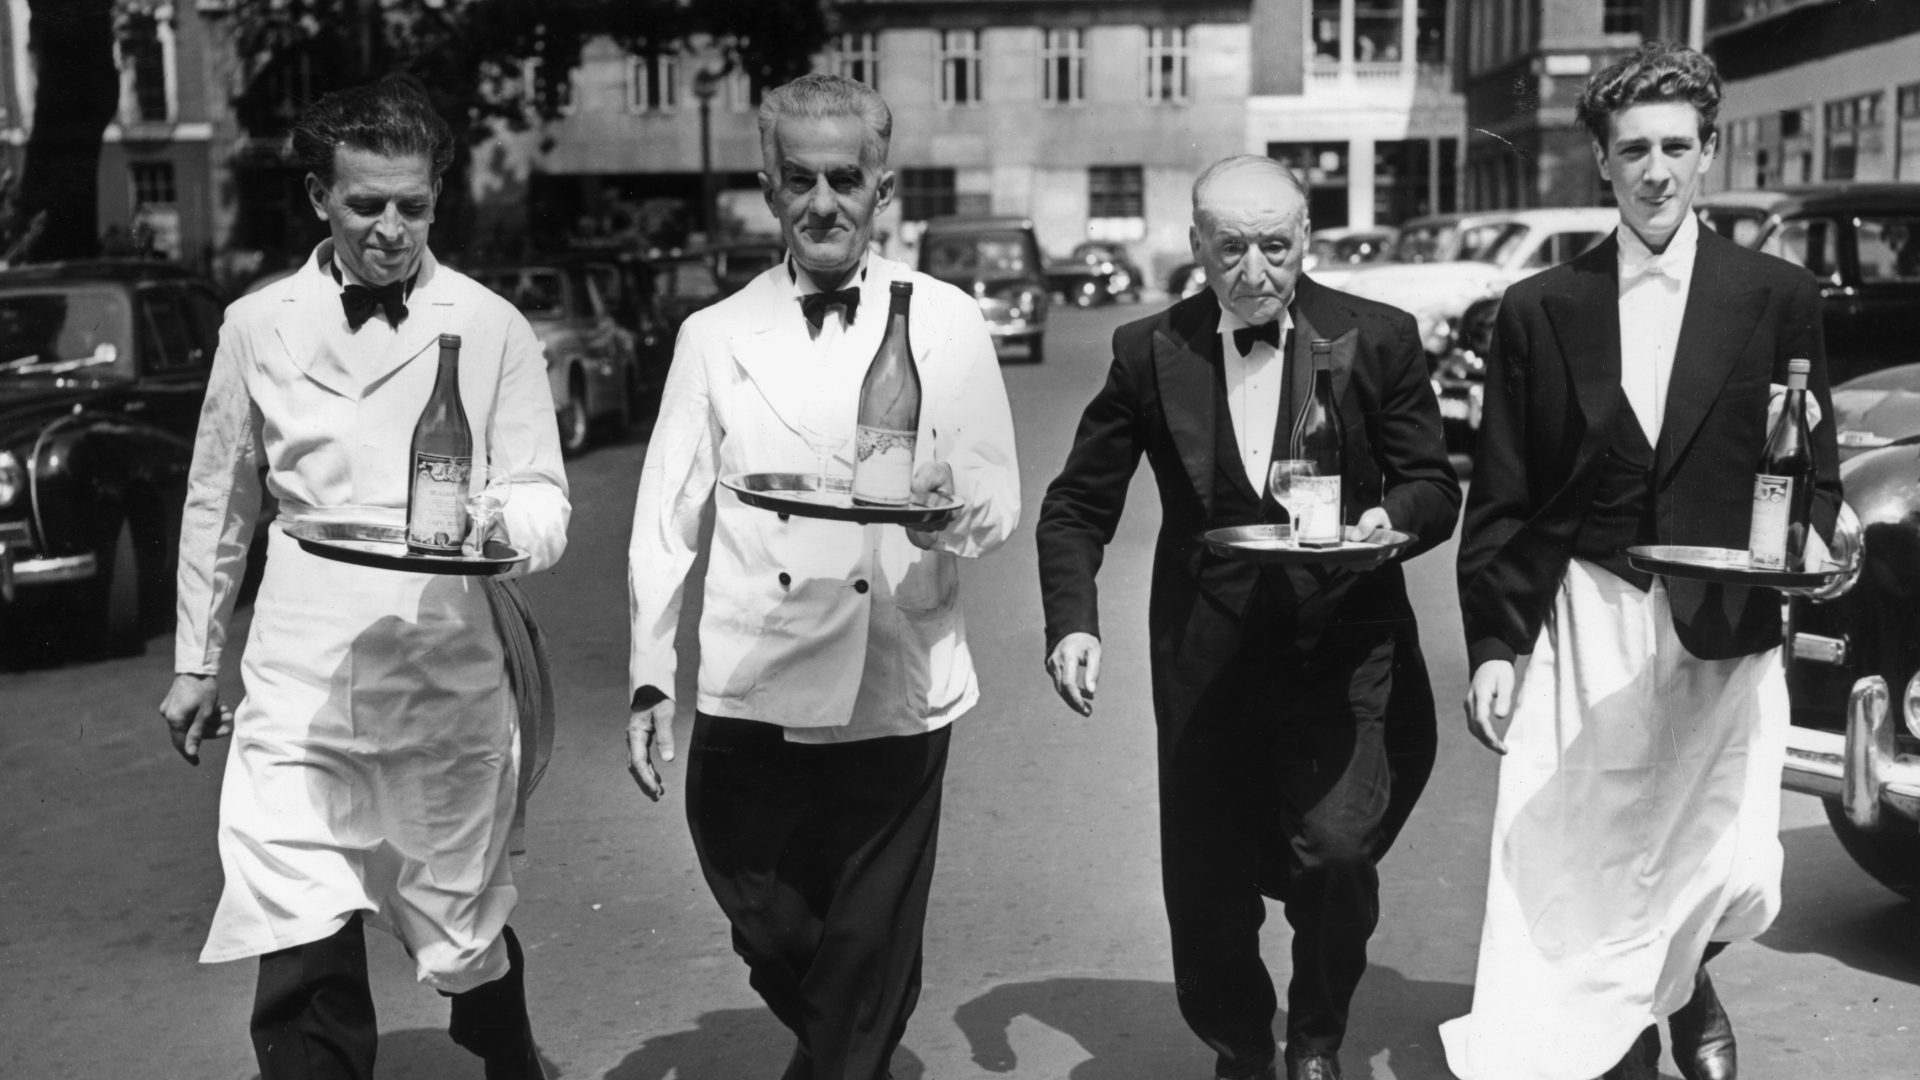 London waiters in 1955 train for their annual race. Left to right: Fermo Isotta, Ugo Taddei, Salvatore Criscuolo (75 years old), and Tony Ford. Photo: Reg Speller/Fox Photos/ Getty